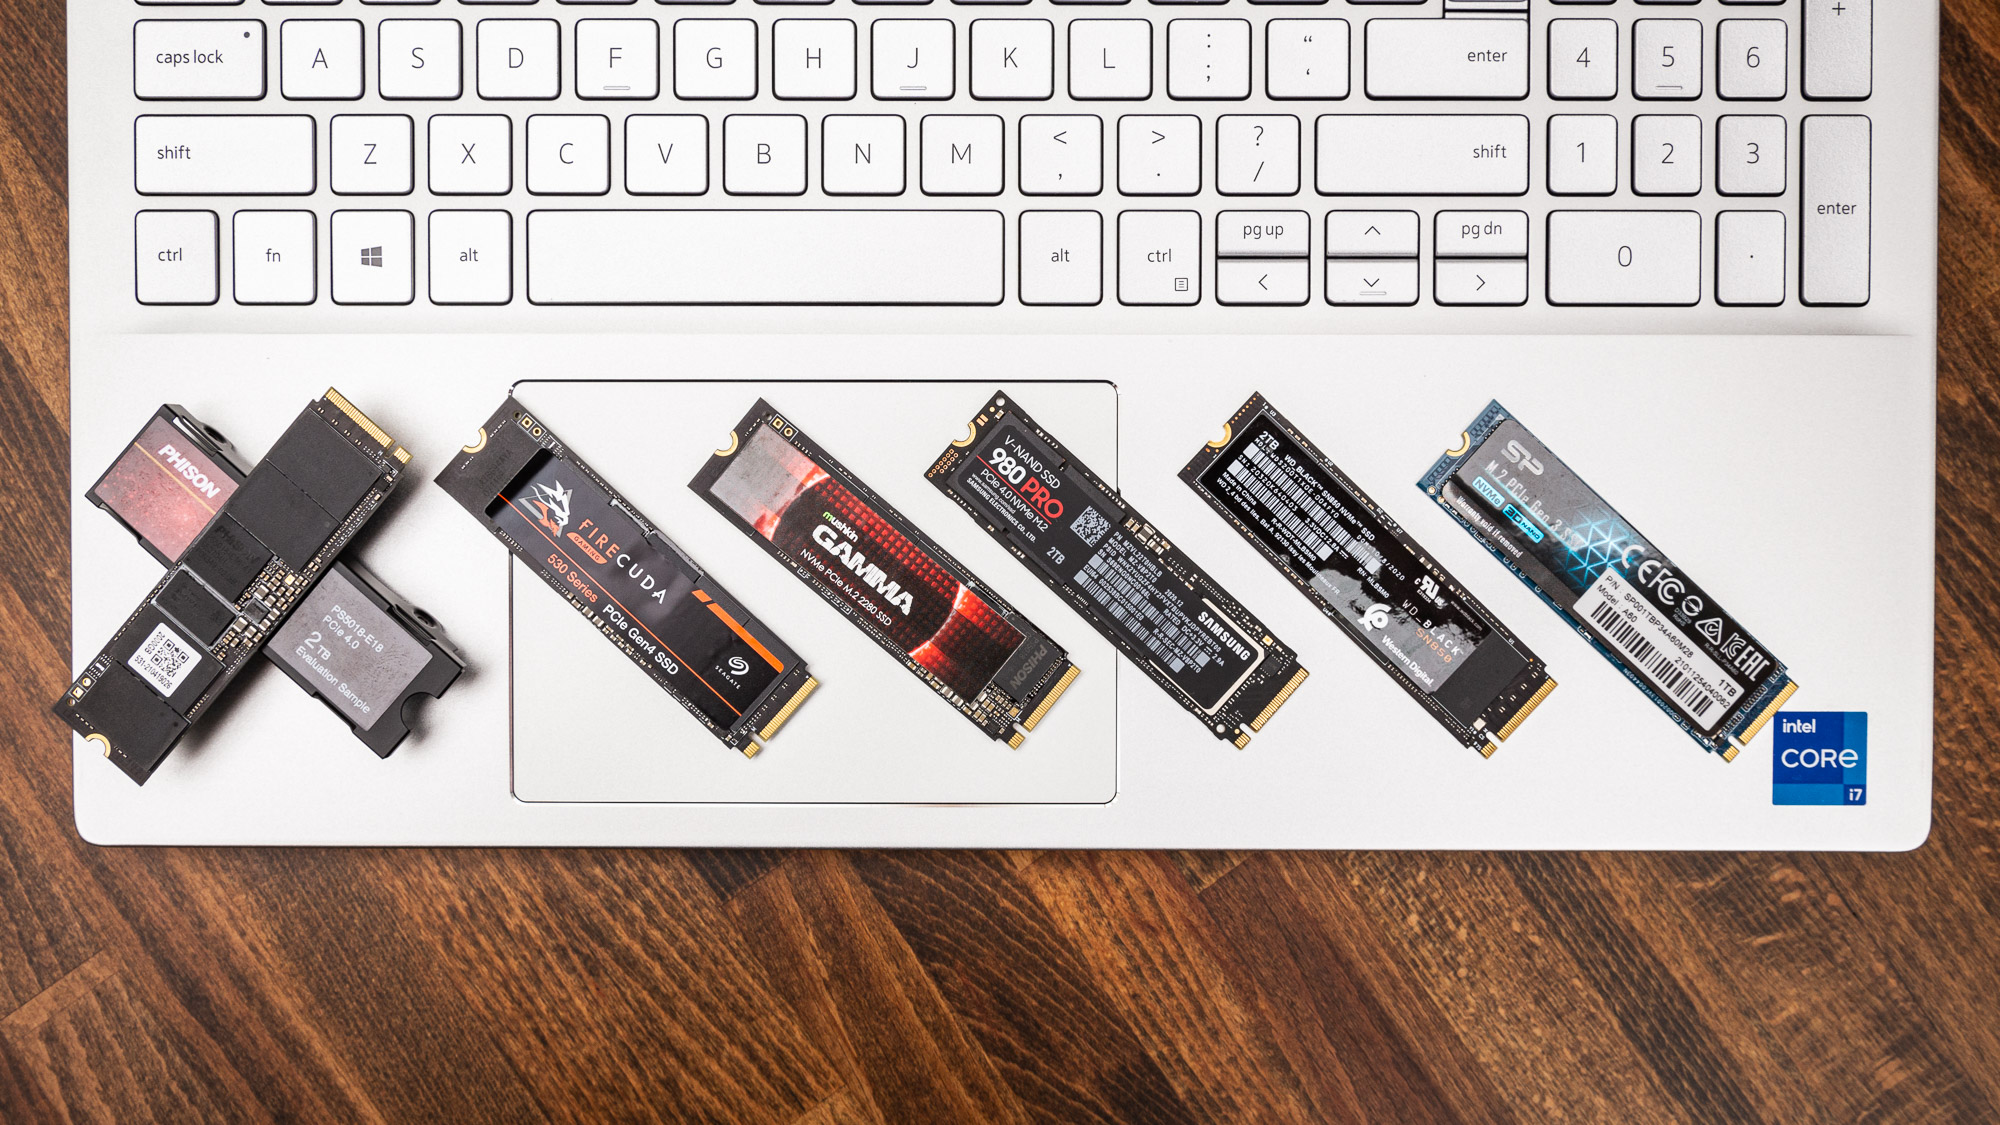 Upgrading Your Laptop with PCIe 4.0 Storage: Which SSD is the best?